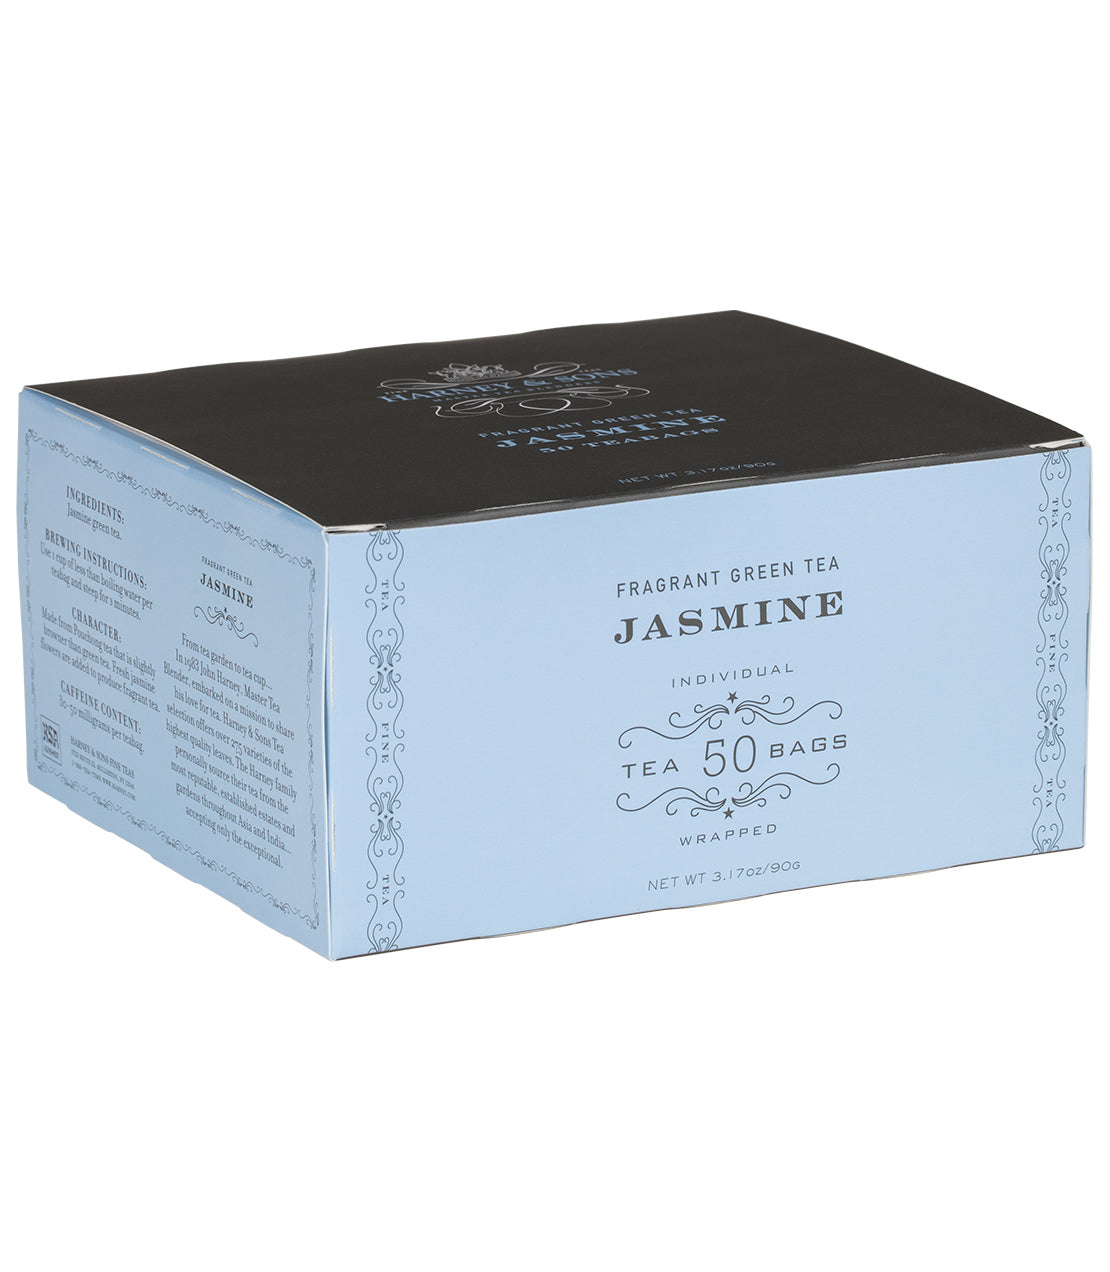 Jasmine, Box of 50 Foil Wrapped Teabags - Teabags Box of 50 Foil Wrapped Teabags - Harney & Sons Fine Teas